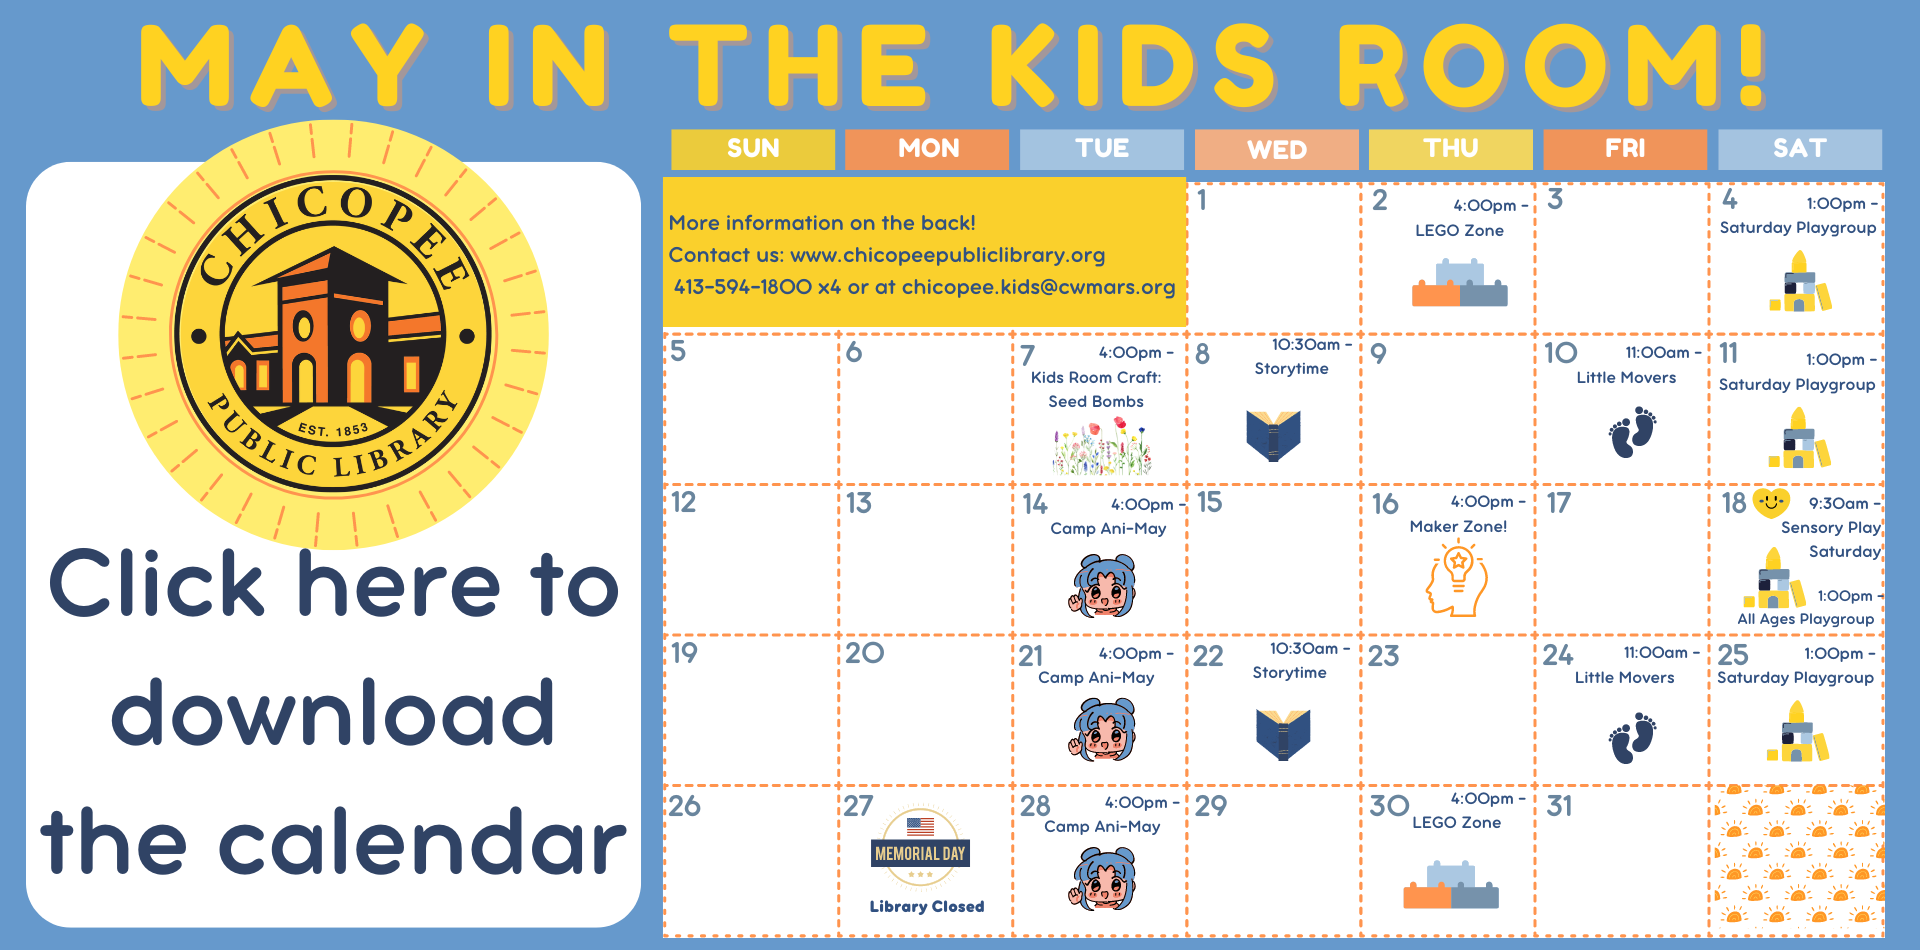 MAY IN THE KIDS ROOM. CLICK HERE TO DOWNLOAD THE CALENDAR